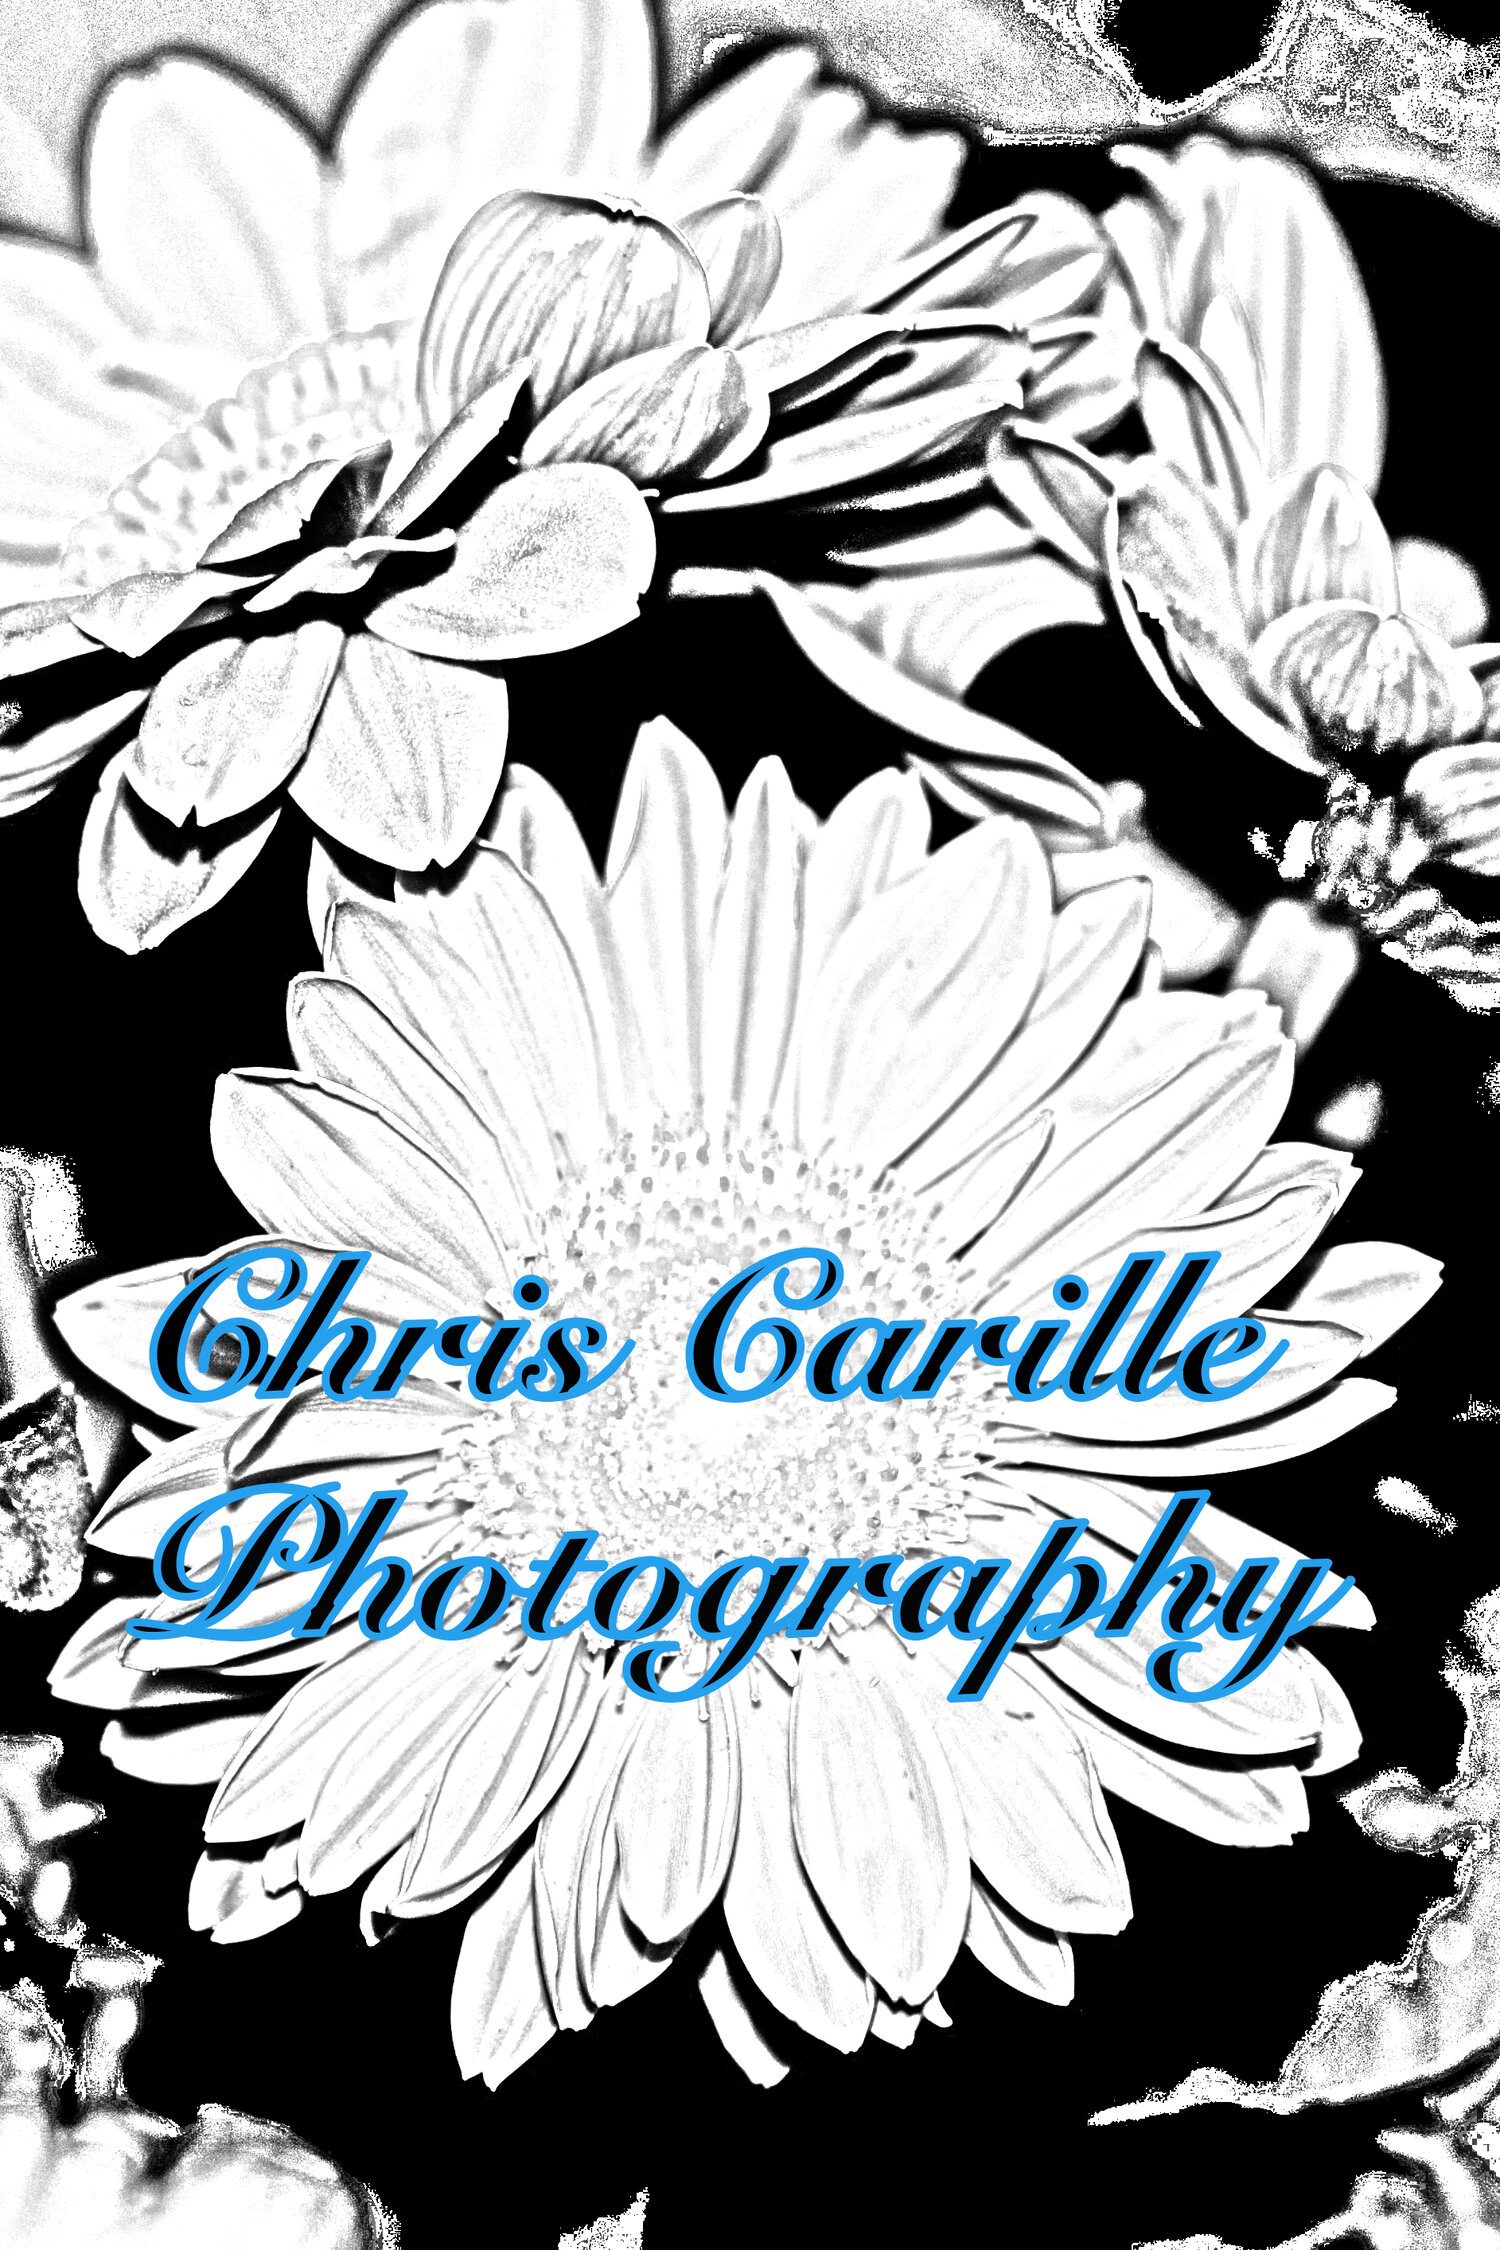 Carille Photography